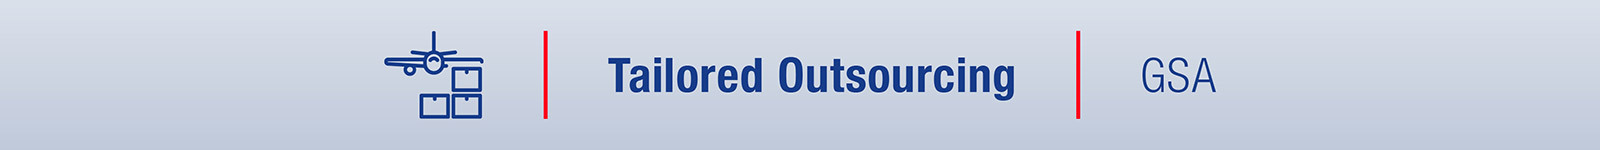 Fly Us Tailored Outsourcing GSA1